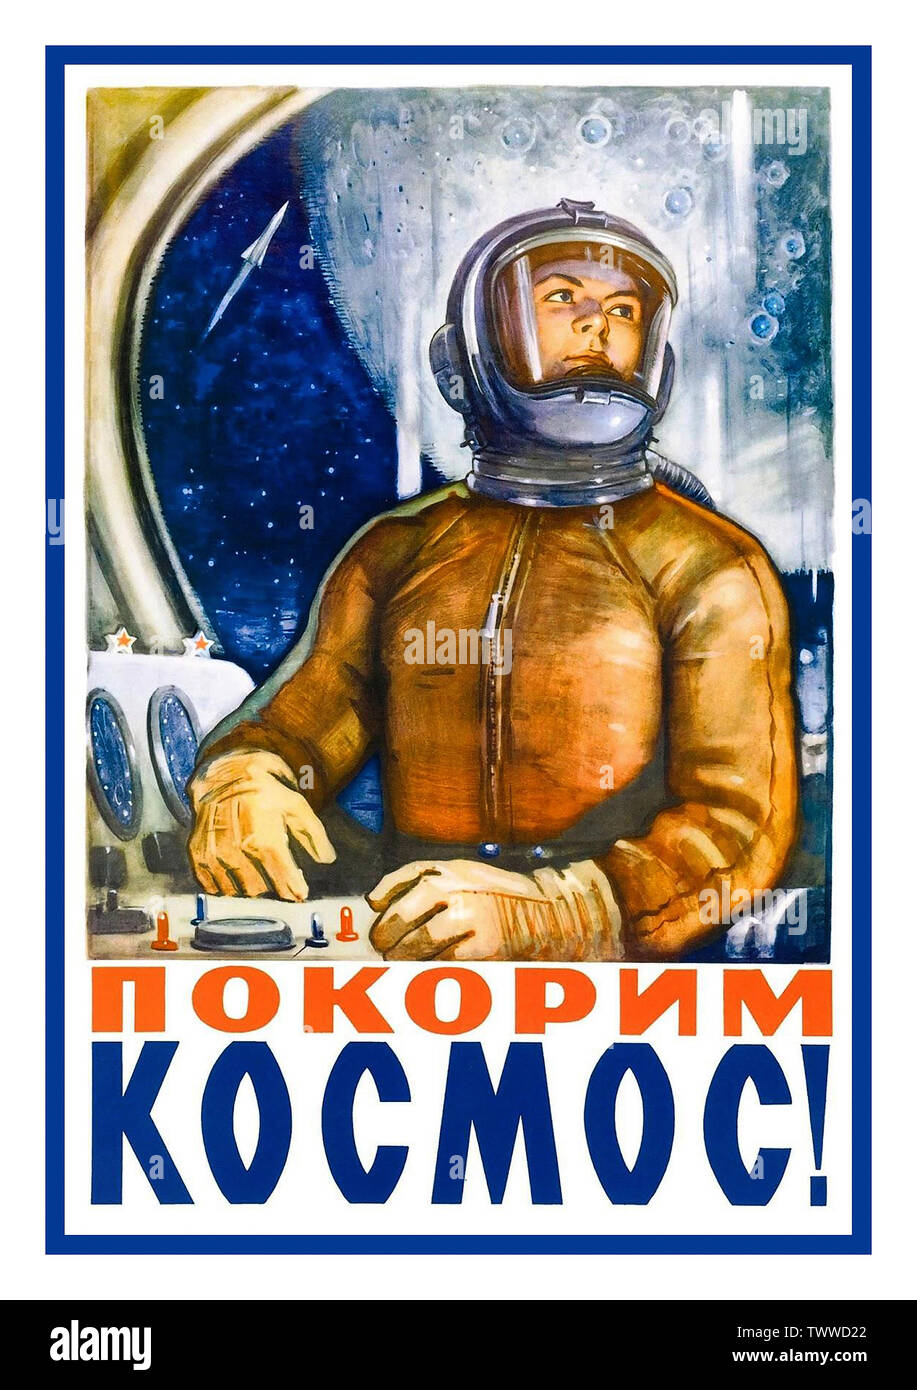 Vintage Russian Propaganda Space Race Poster 'Let’s conquer Space!' Russian Soviet USSR space propaganda with the moon featured in background 1960. by L. Golovanov. Stock Photo